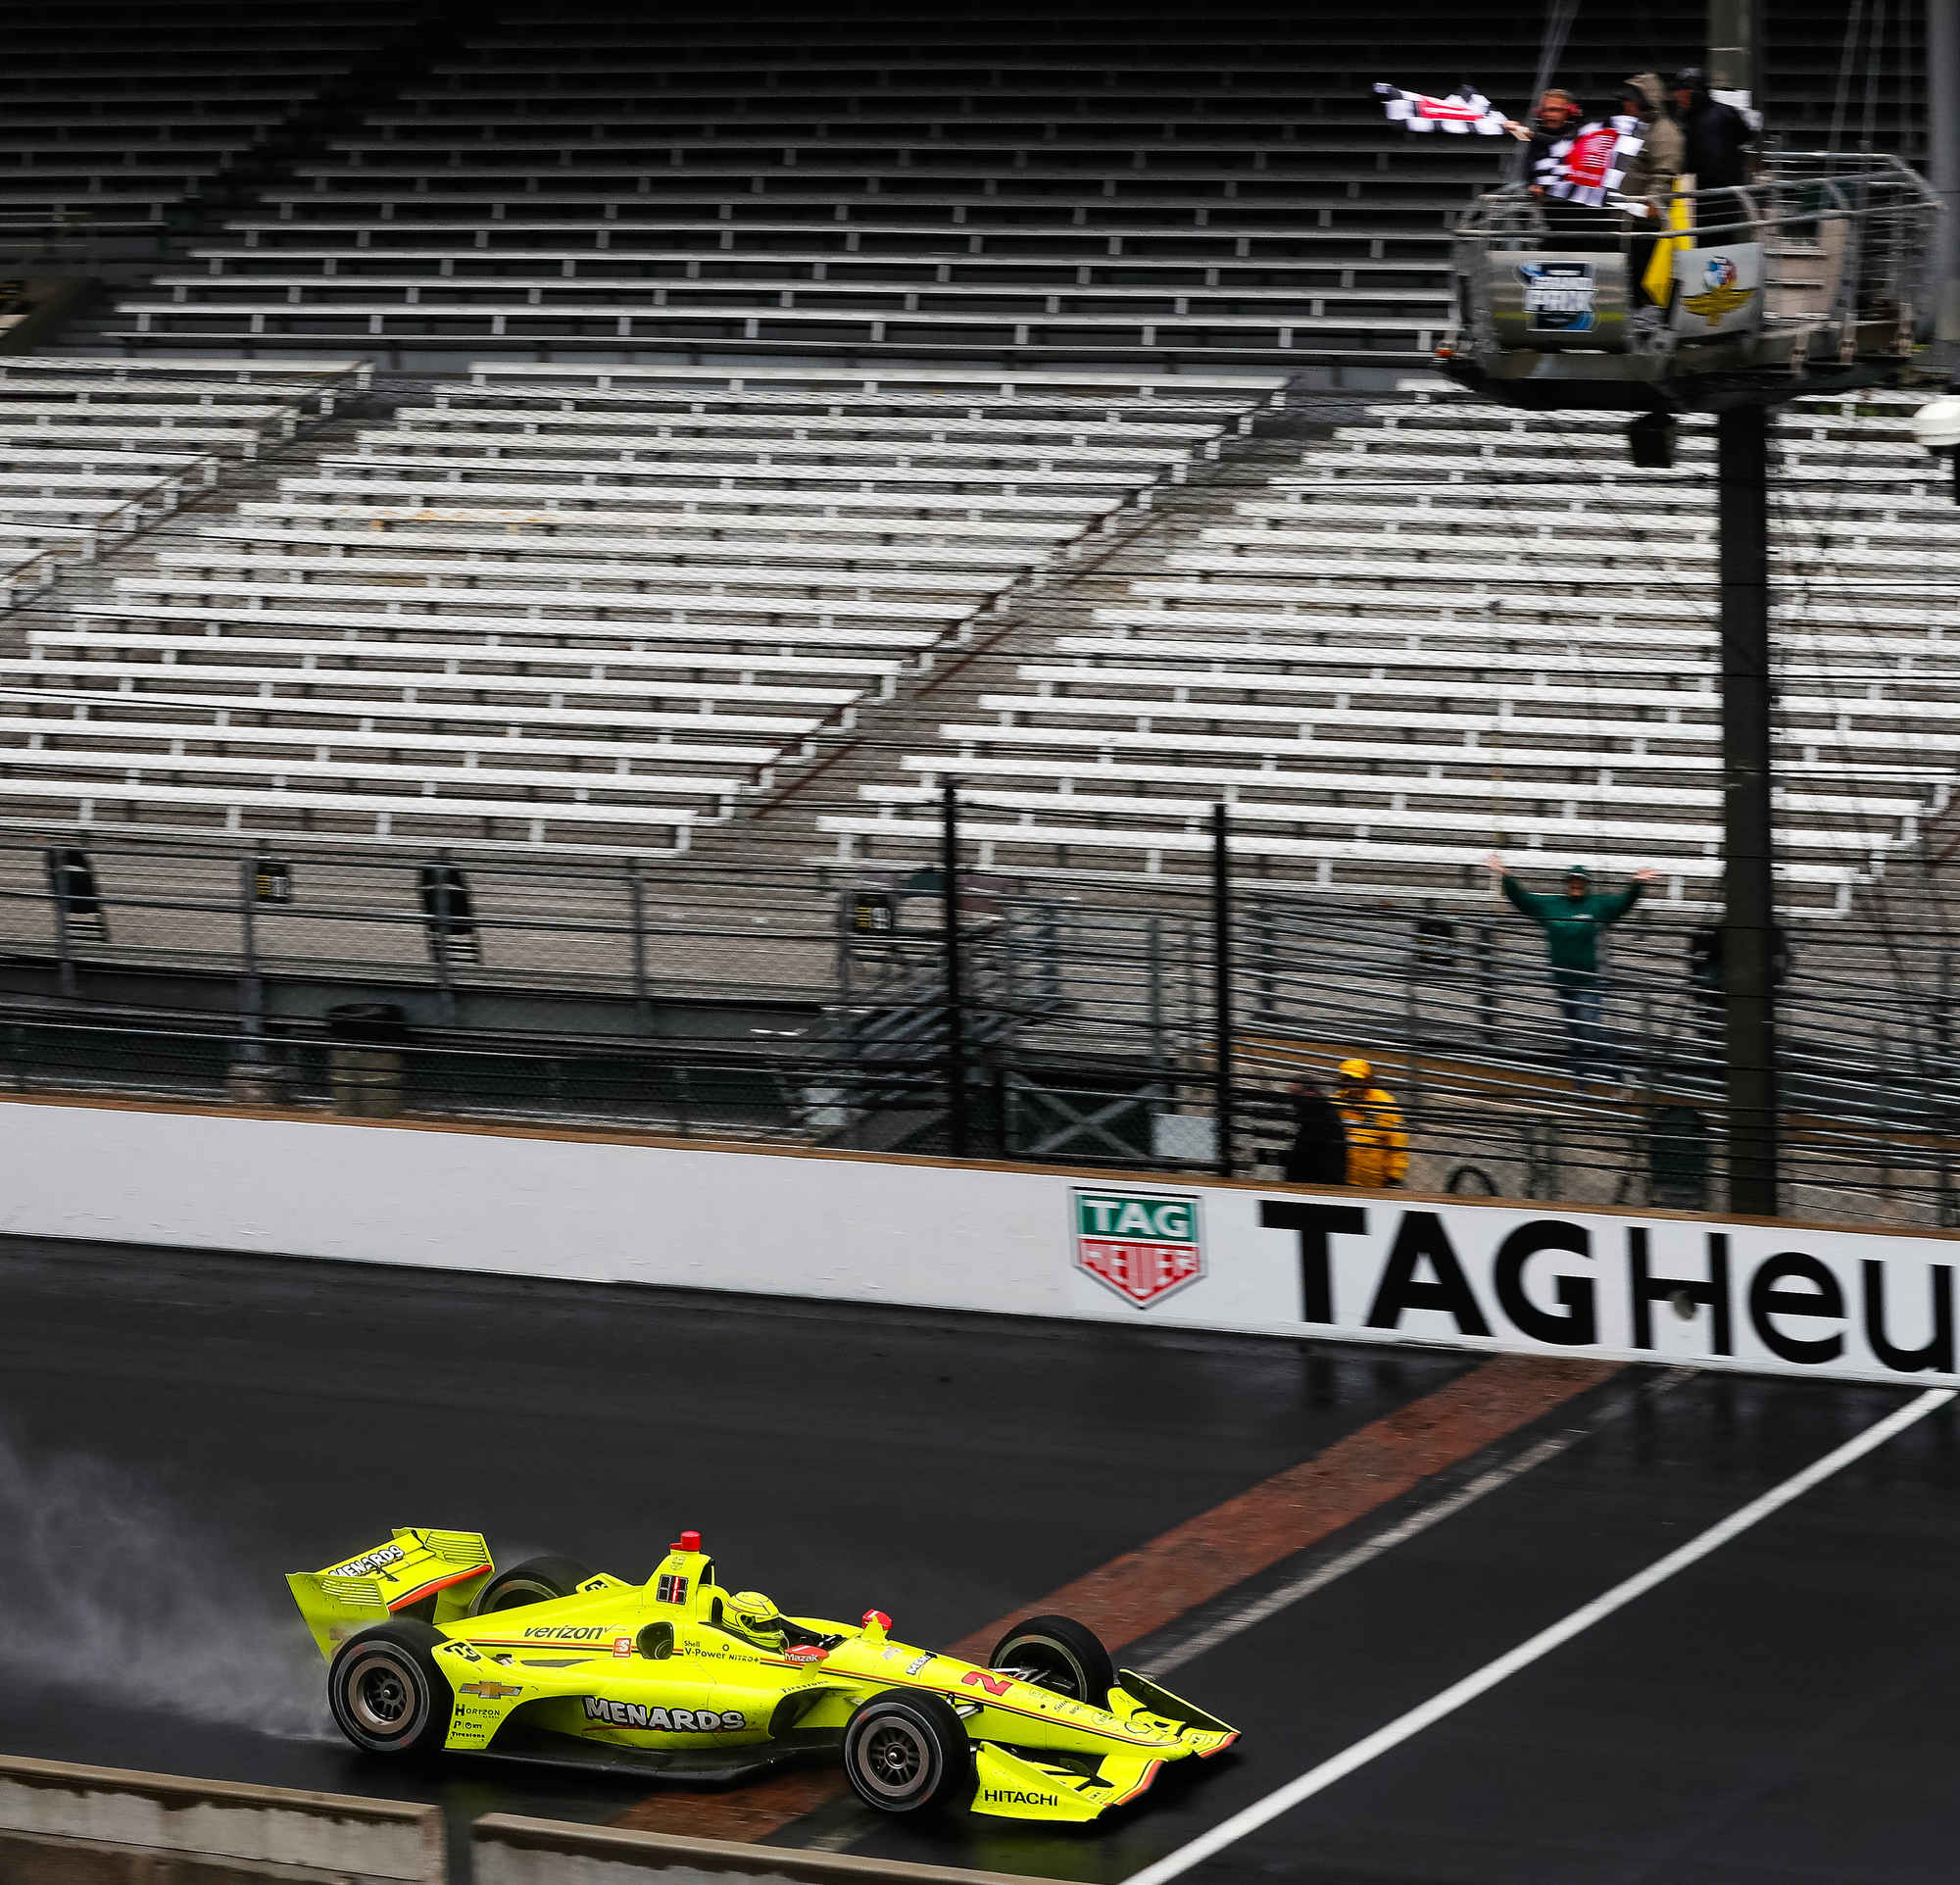 Pagenaud takes the checkers before a packed grandstand